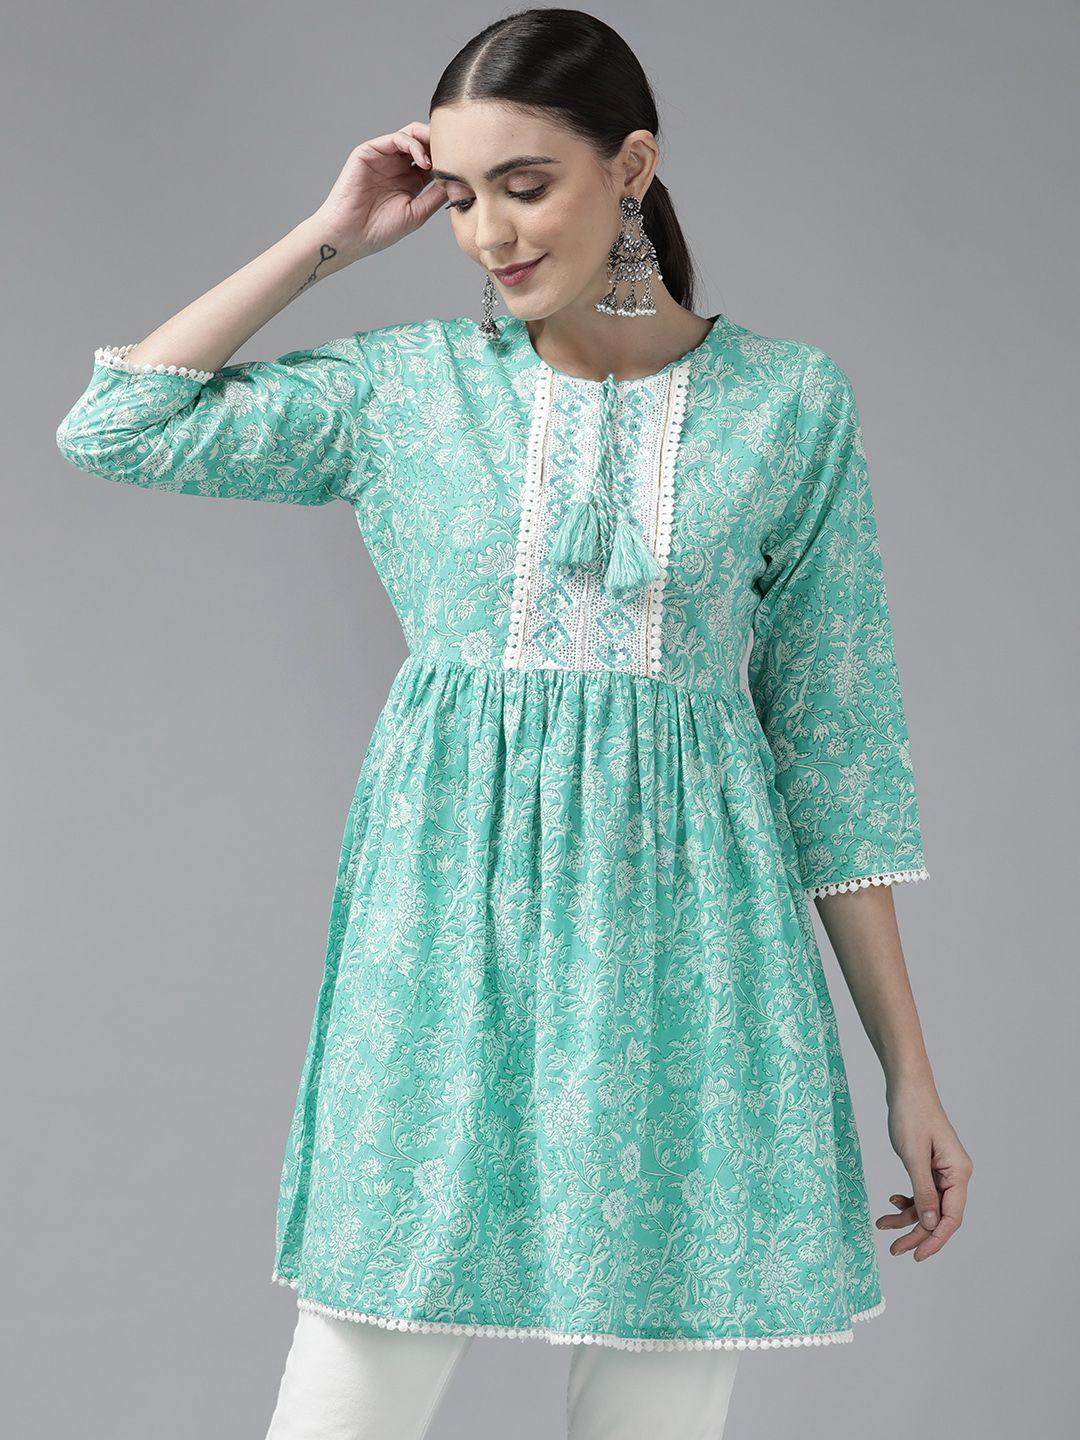 amirah s green & white printed tunic with tie-up neck